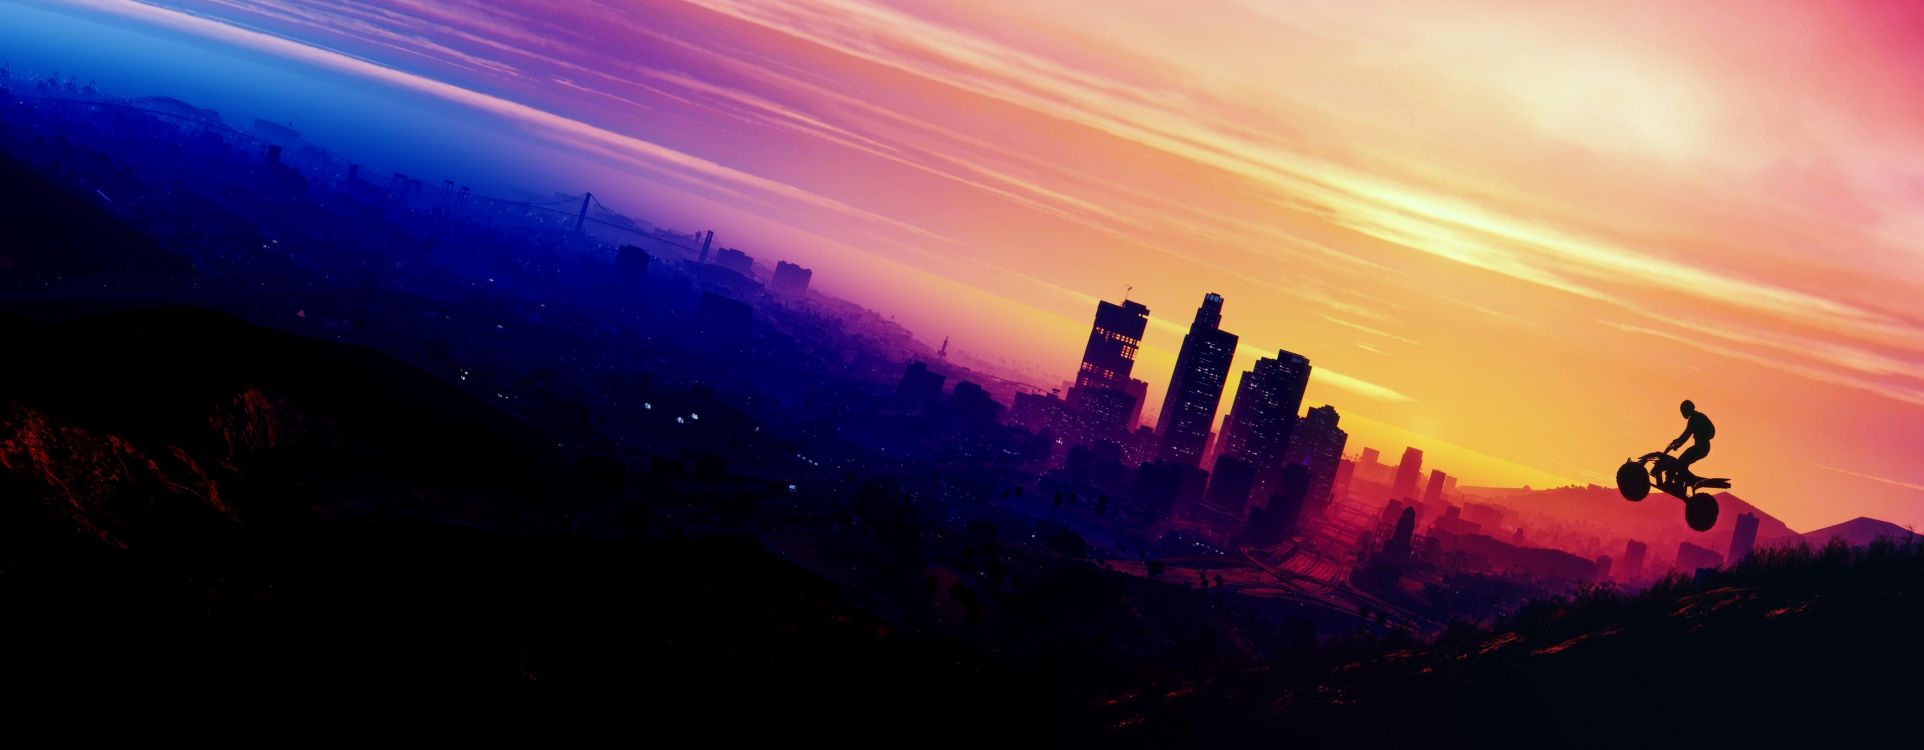 Grand Theft Auto v, Grand Theft Auto San Andreas, Horizon, Afterglow, Sunset. Wallpaper in 4935x1923 Resolution